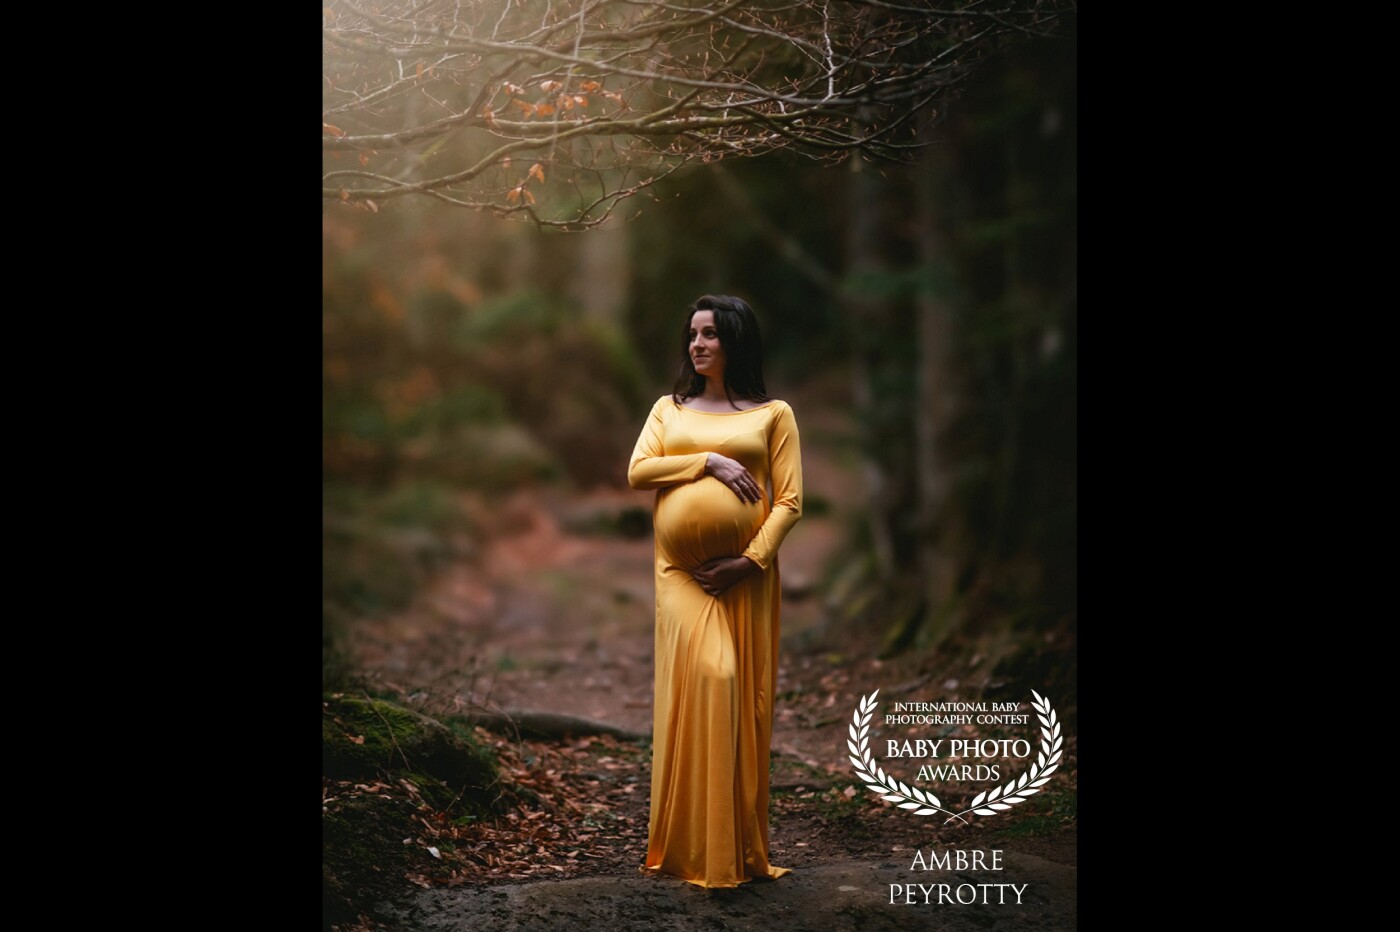 This maternity session was an ode to the beauty of feminity and fall, as we walked through an amazing and beautiful forest in Central France and enjoyed the falling leaves.